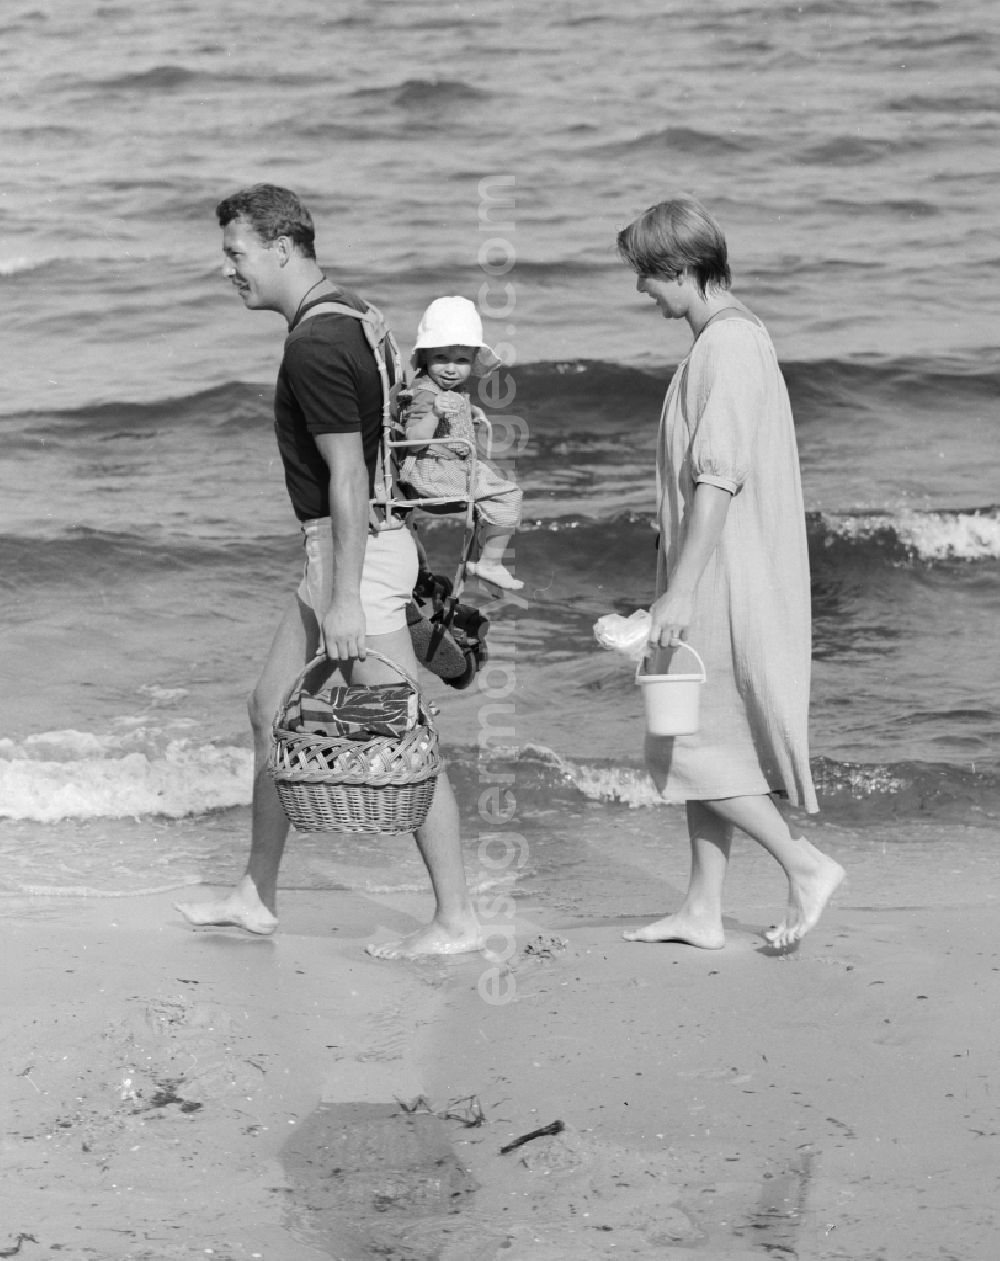 Ückeritz: A family goes on the Baltic Sea beach in Ueckeritz walk, in the state of Mecklenburg-Western Pomerania in the field of the former GDR, German Democratic Republic